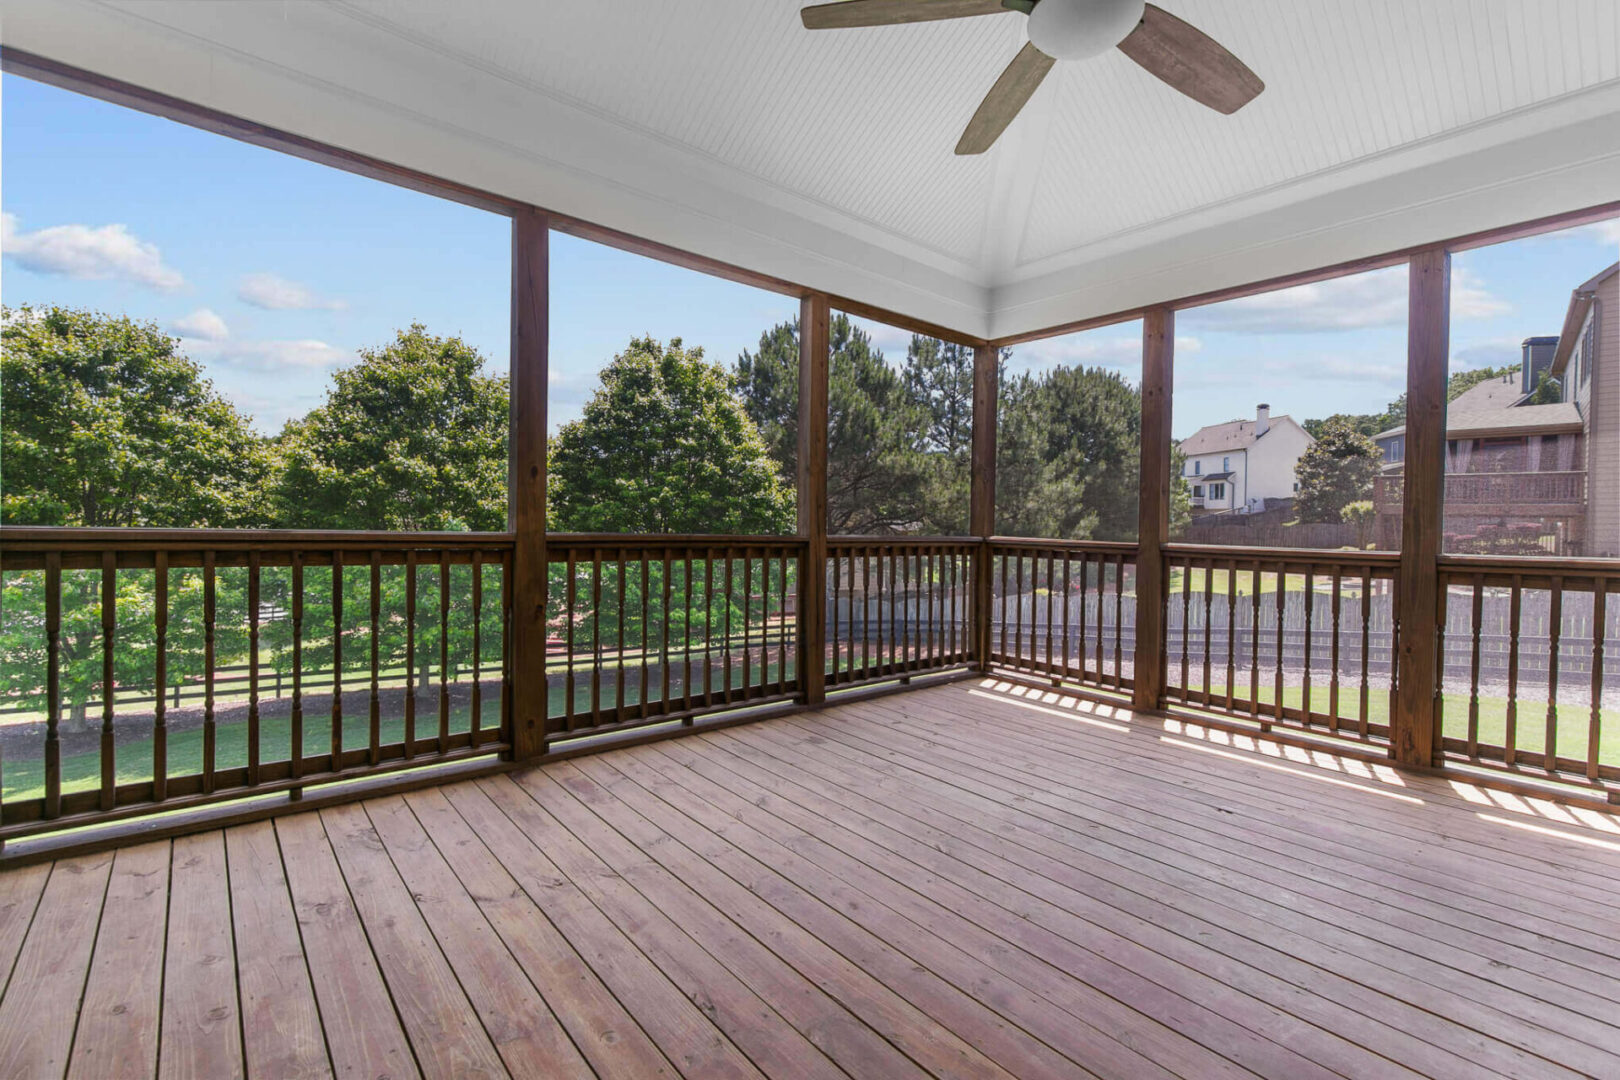 A large open porch with a ceiling fan.